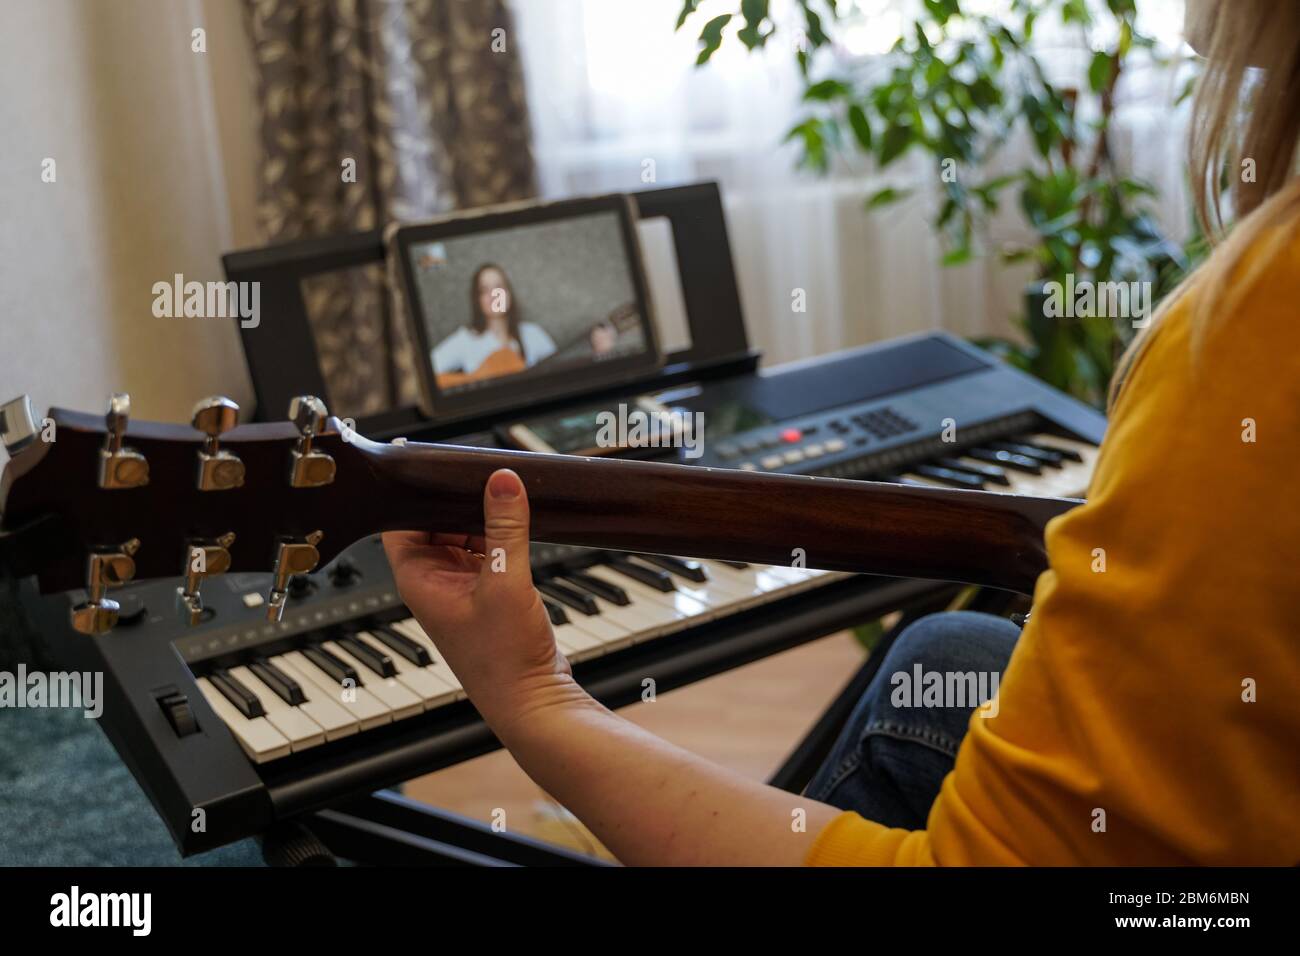 Musicians rehearse online in isolation because of the coronavirus pandemic. Learning music at home. Stock Photo